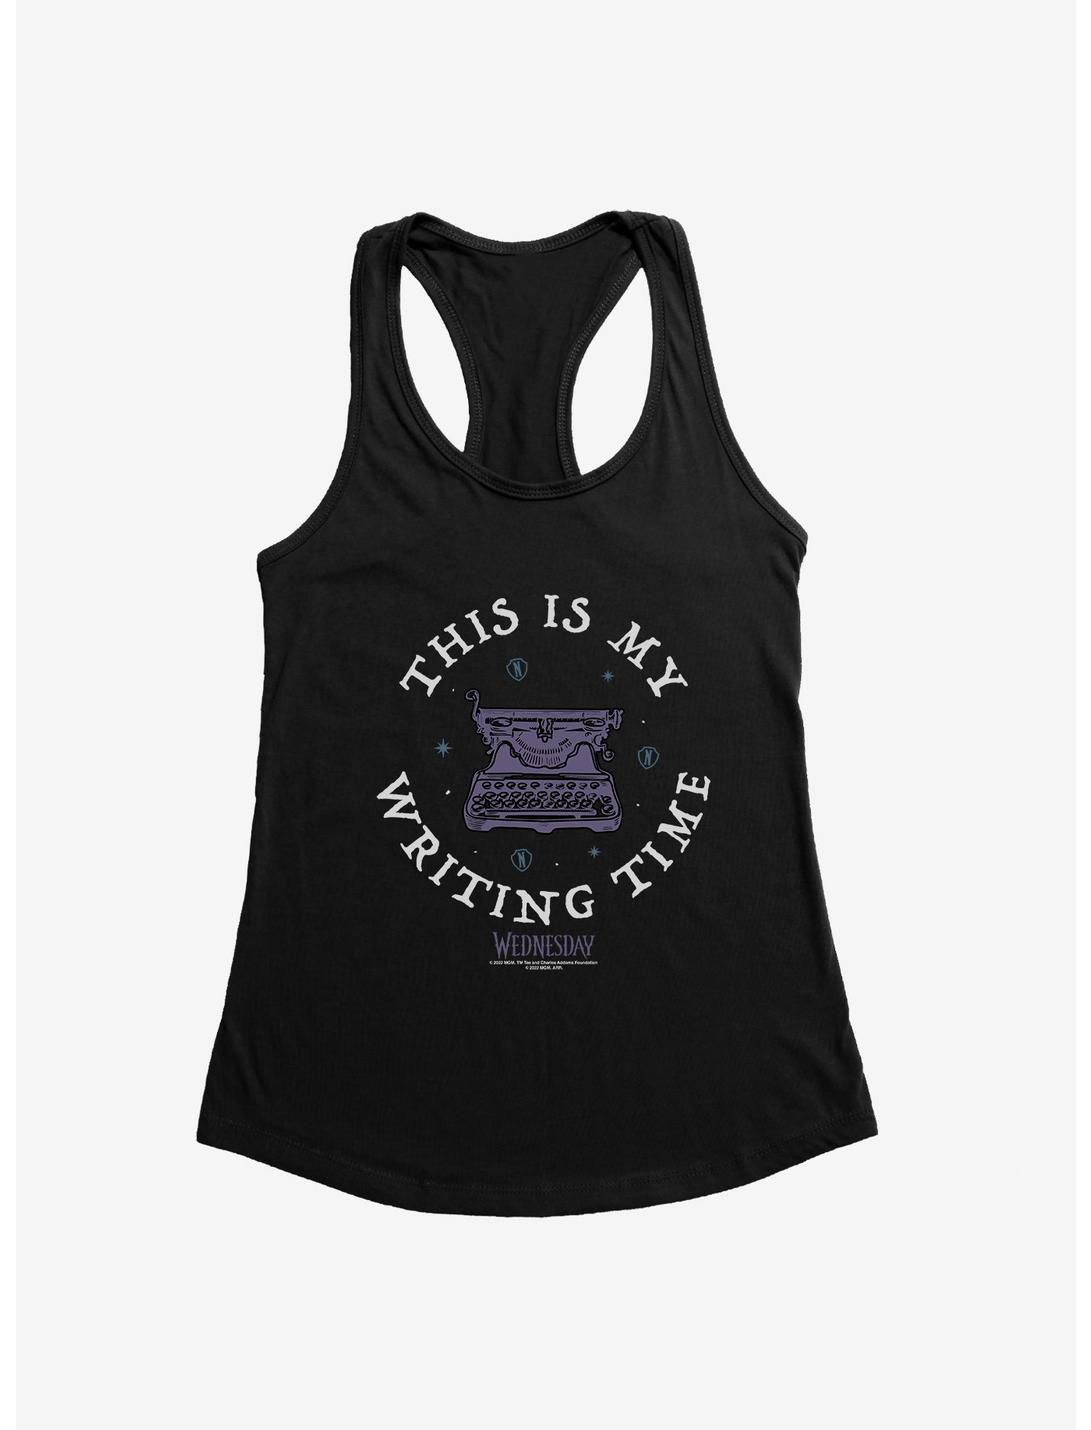 Wednesday This Is My Writing Time Girls Tank, BLACK, hi-res